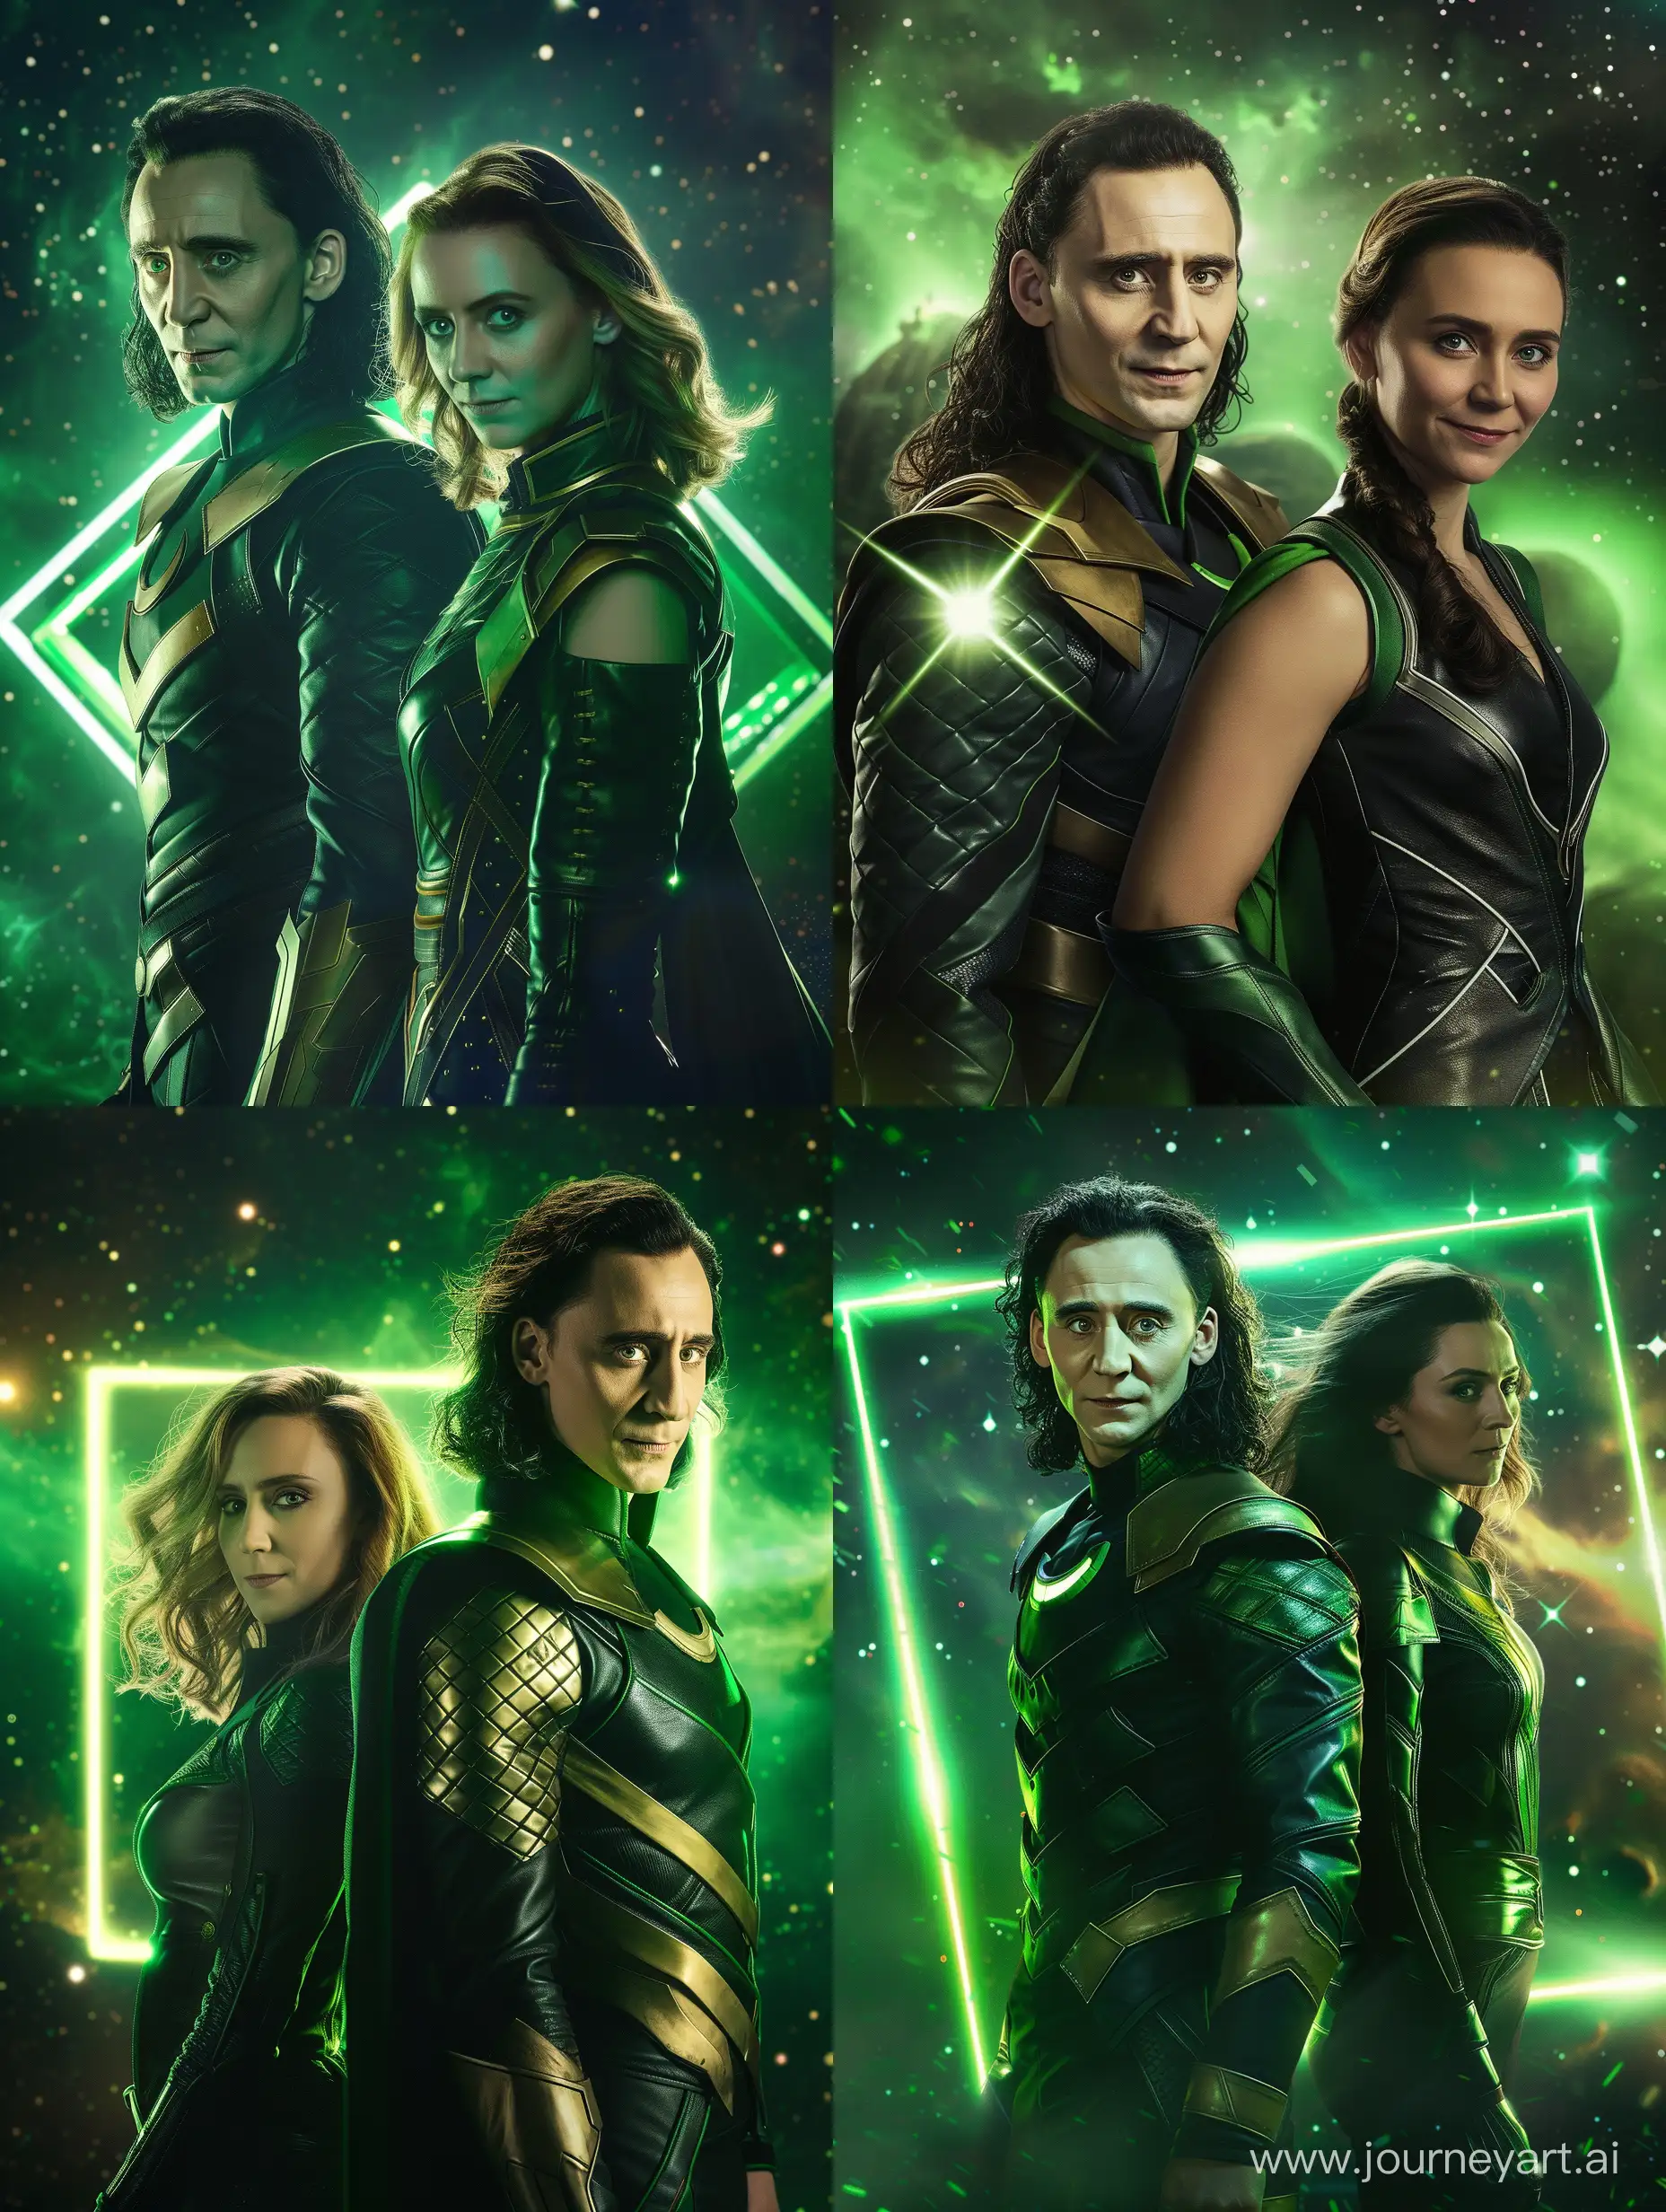 Tom-Hiddleston-and-Sophie-Di-Martino-as-Loki-and-Sylvie-in-Leather-Superhero-Costumes-Against-Cosmic-Background